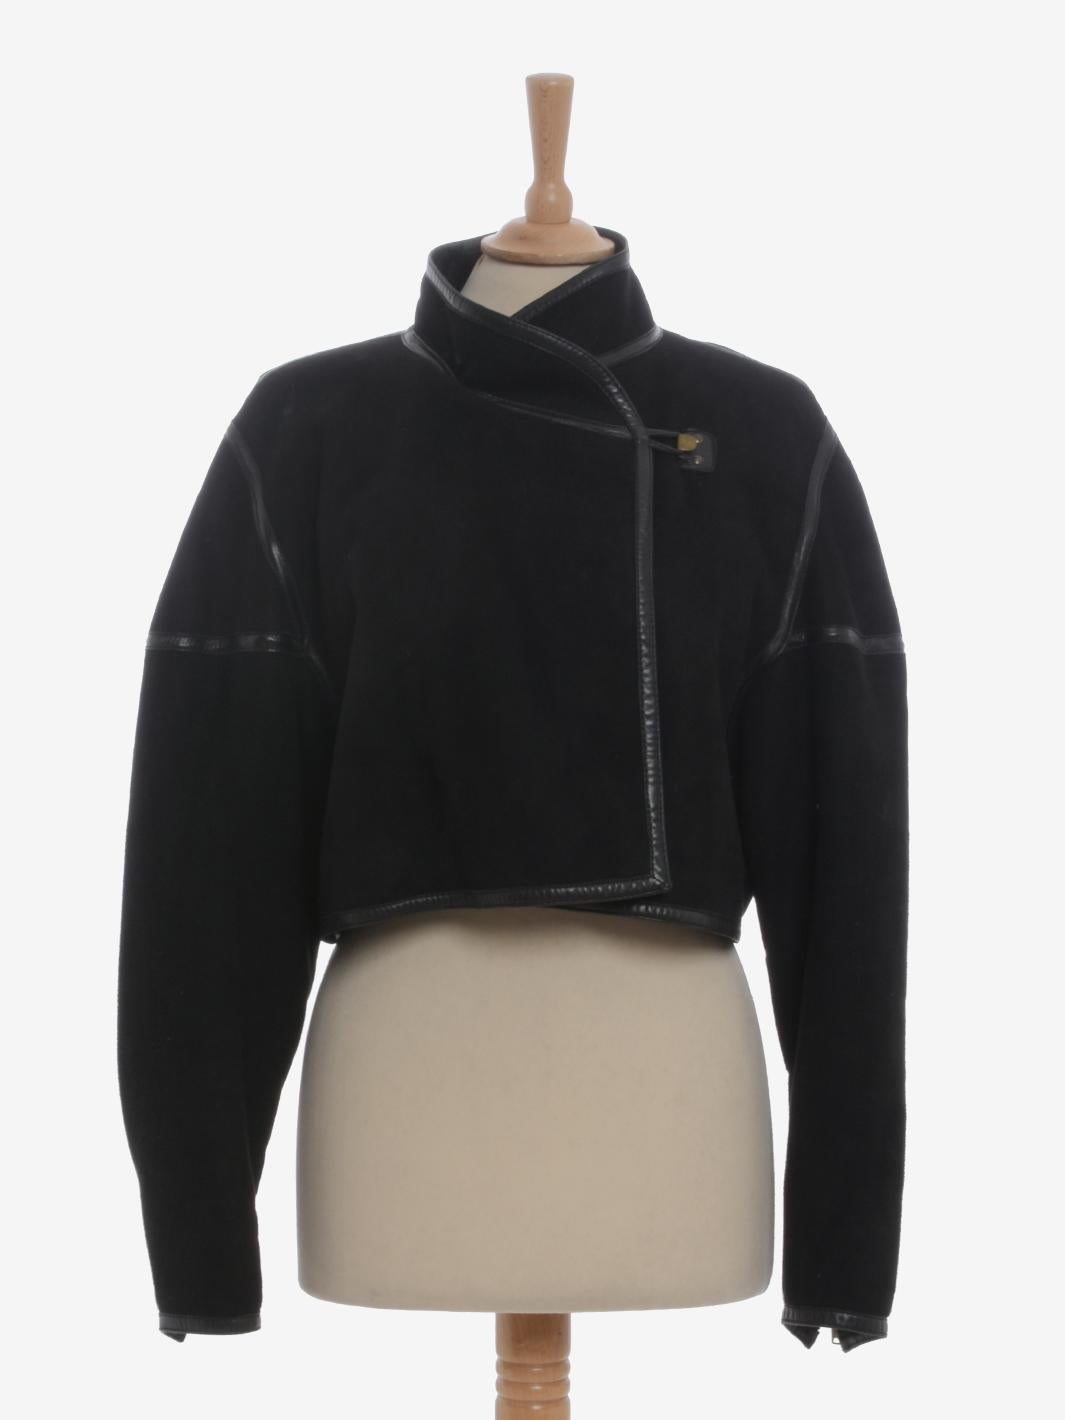 Alaïa Shearling Bolero is a rare longuette made by Azzedine Alaïa in the second half of 1980s featuring asymmetrical frog closure, high collar, and shiny leather details that create geometric lines throughout the garment accentuating the shapes of